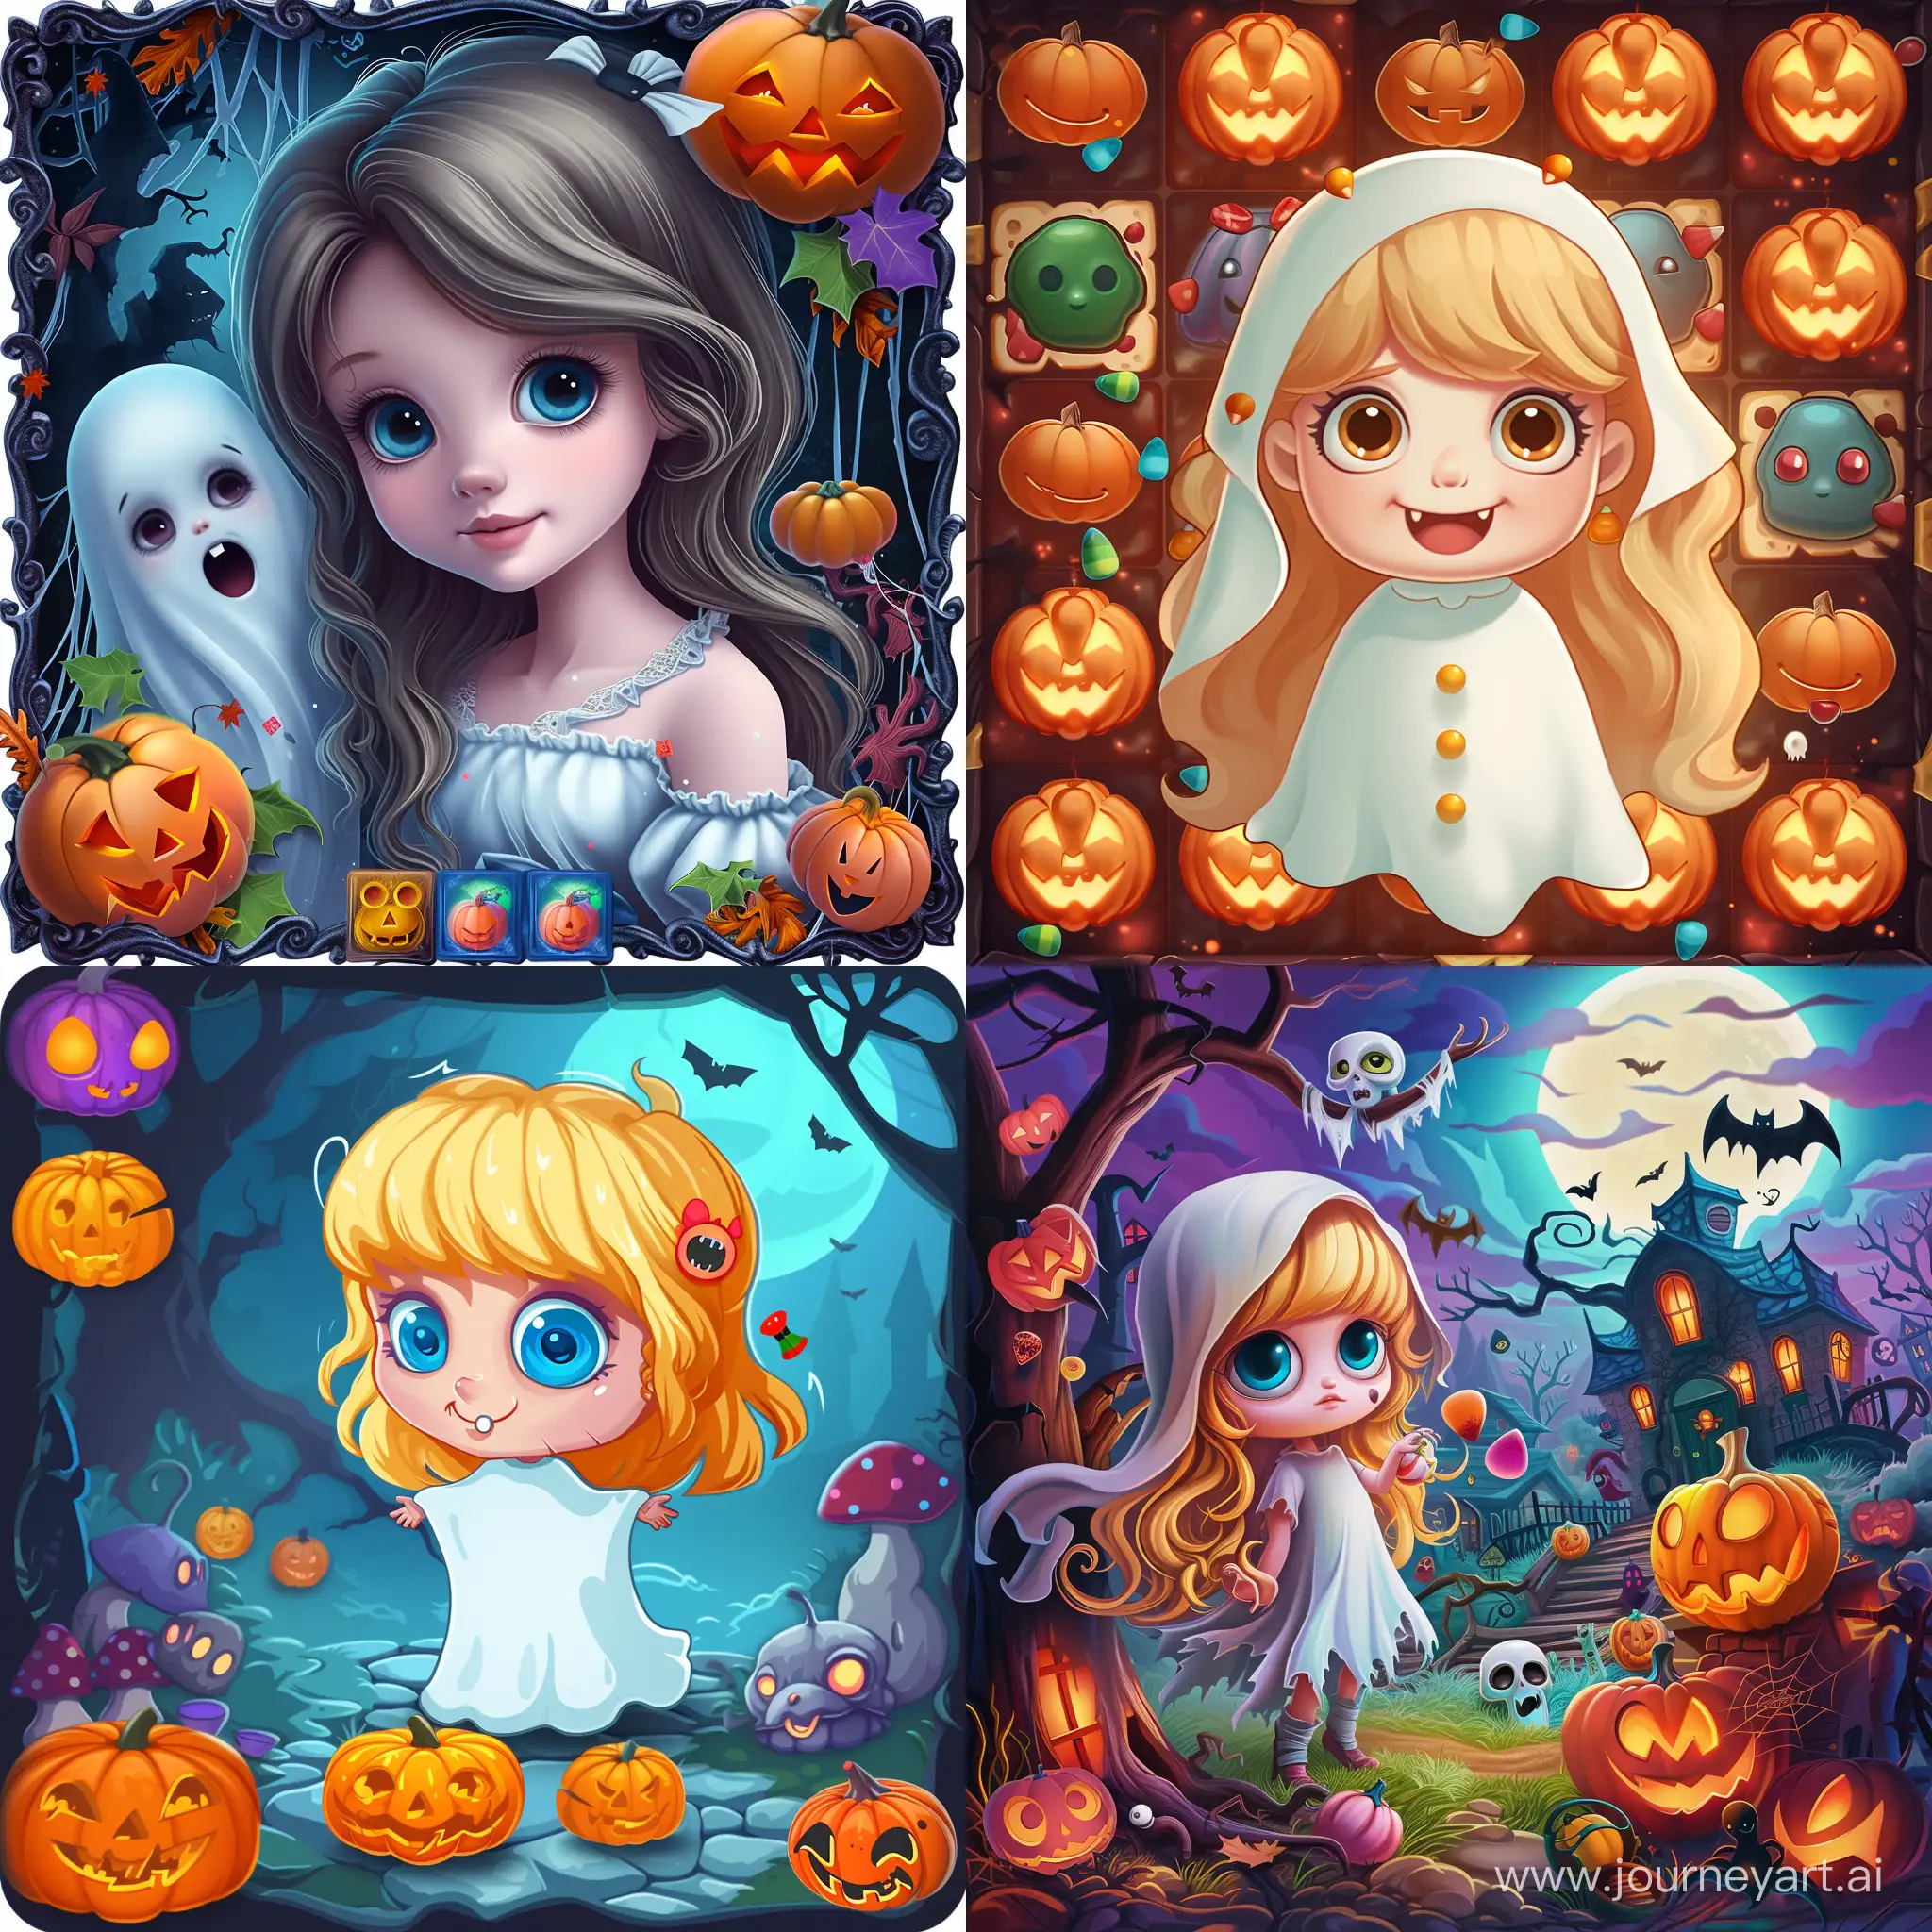 match-3 game screensaver in halloween theme with a ghost girl